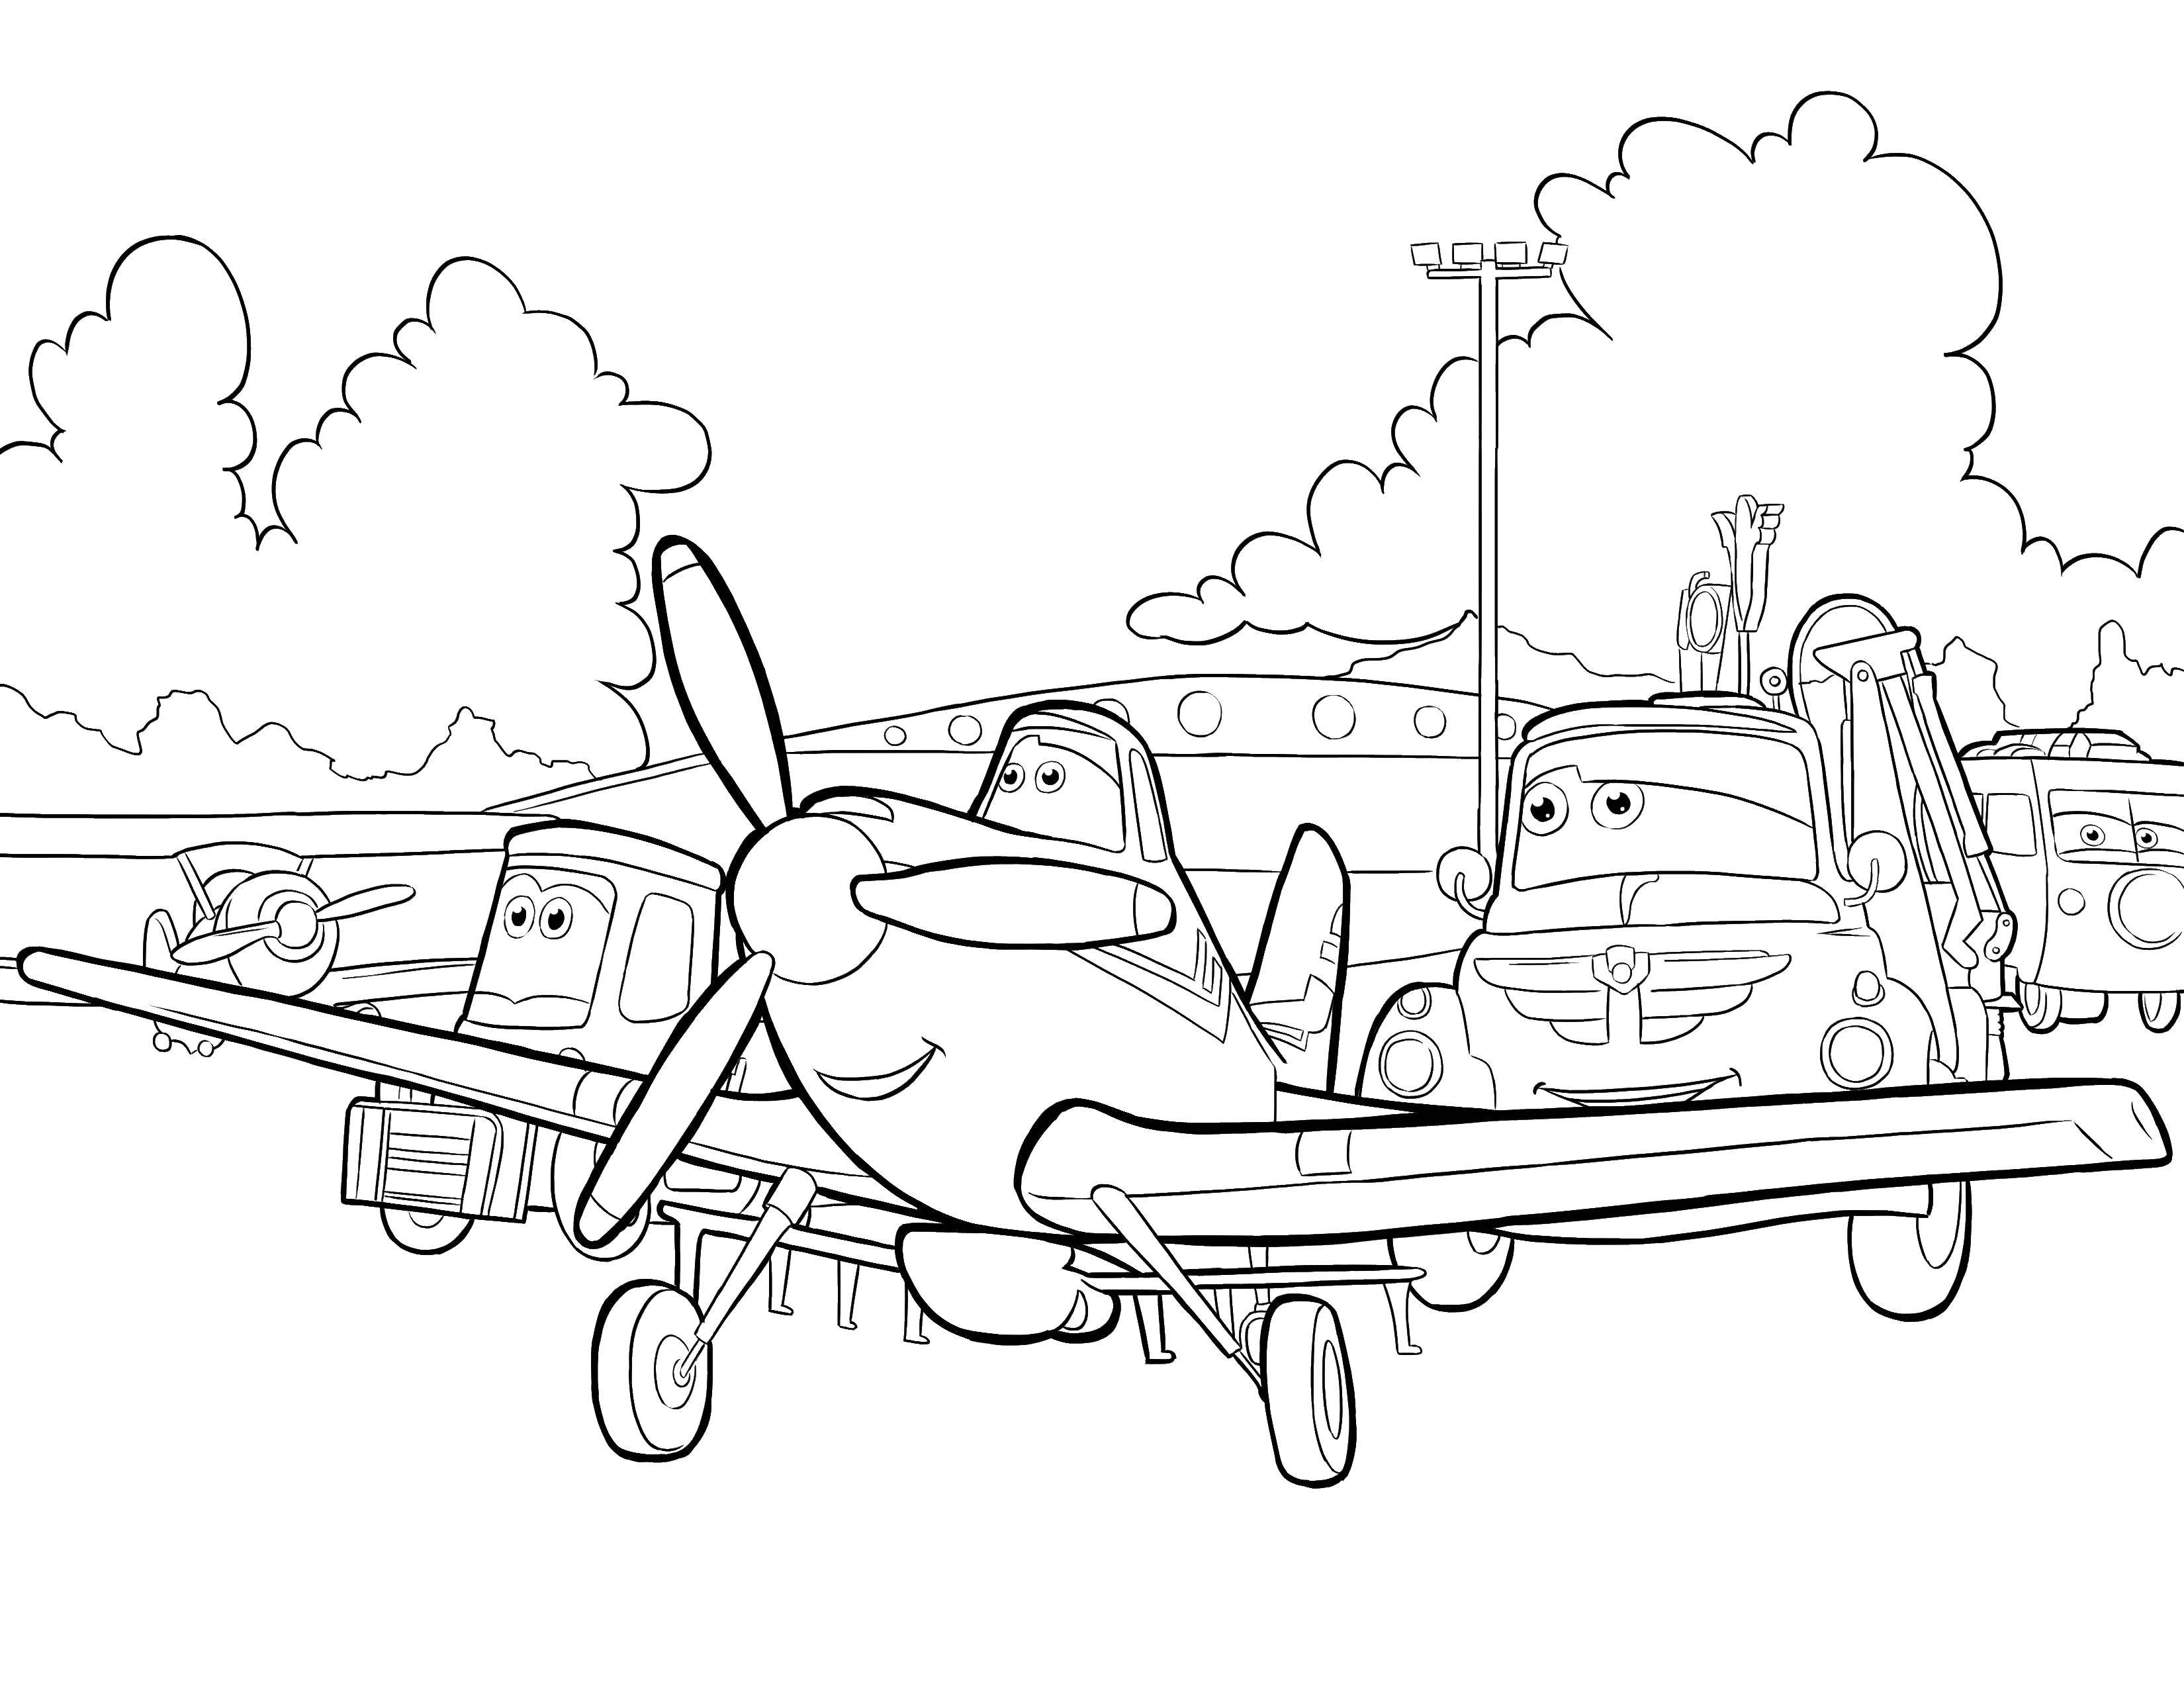 Coloring Aircraft. Category the planes. Tags:  Plane.